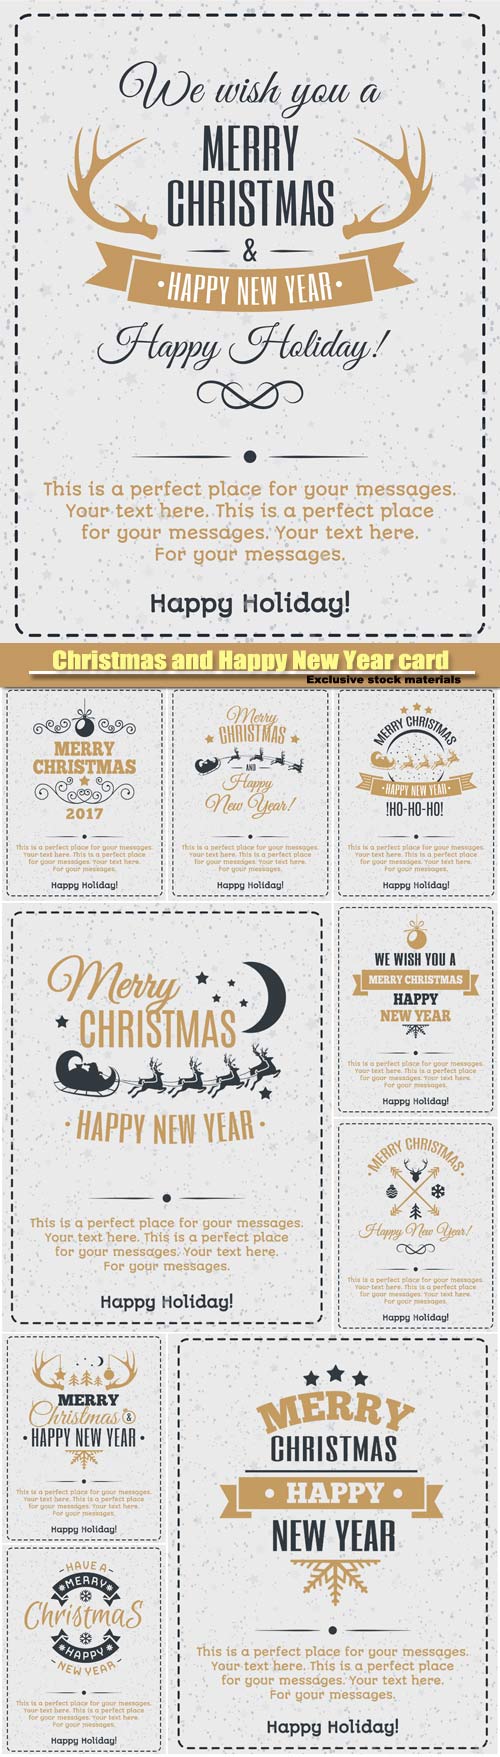 Christmas and Happy New Year card, gold color style, vintage christmas label